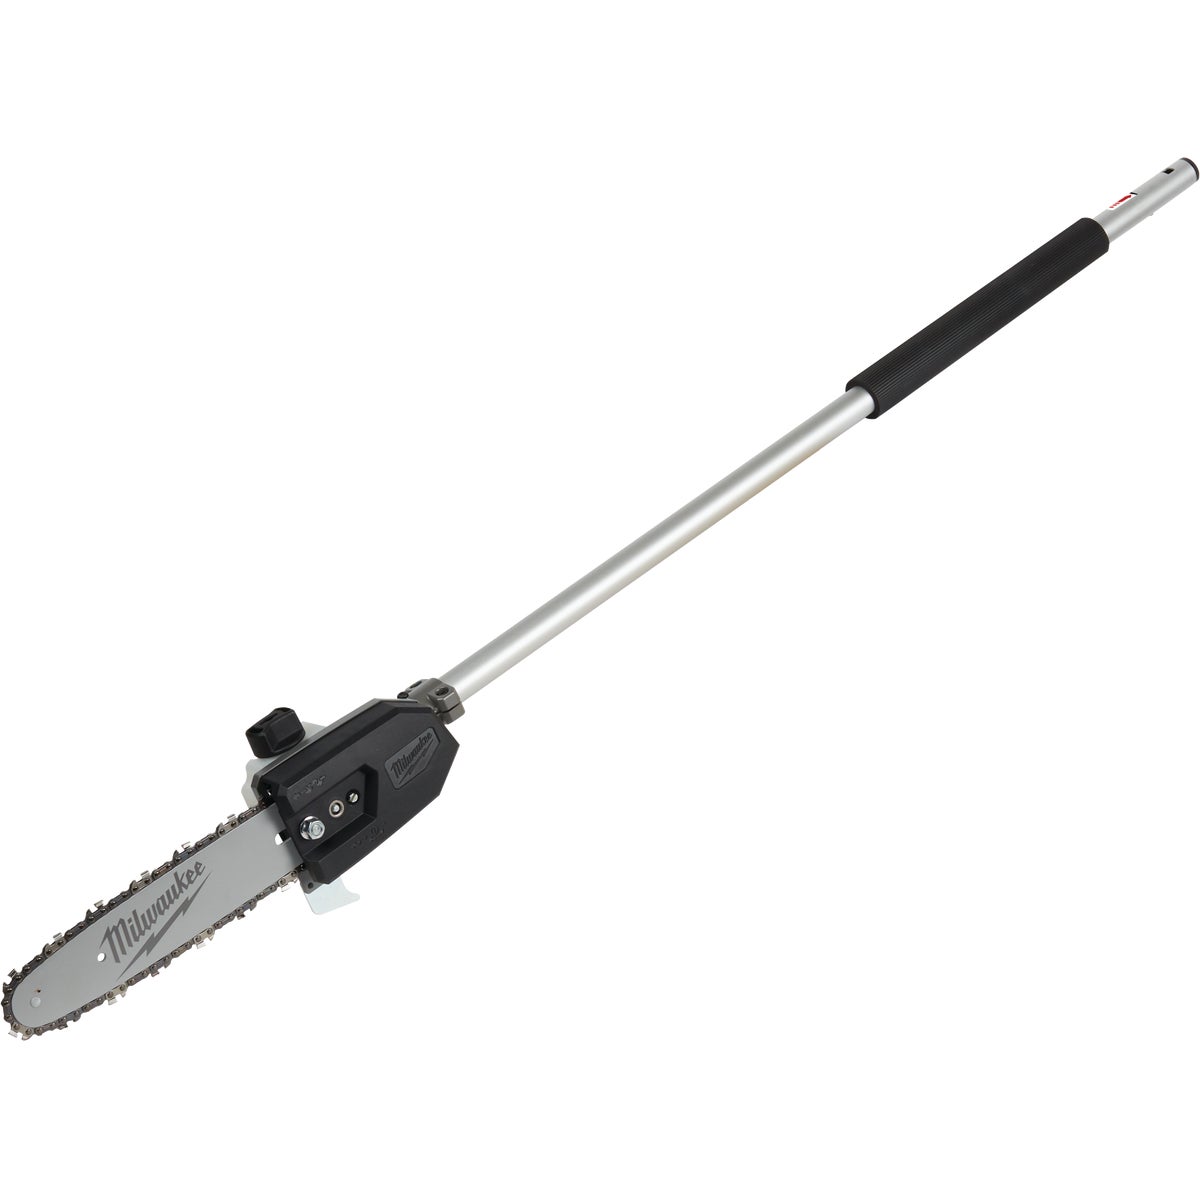 Item 745300, The M18 FUEL QUIK-LOK 10" Pole Saw Attachment is powered by the M18 FUEL 